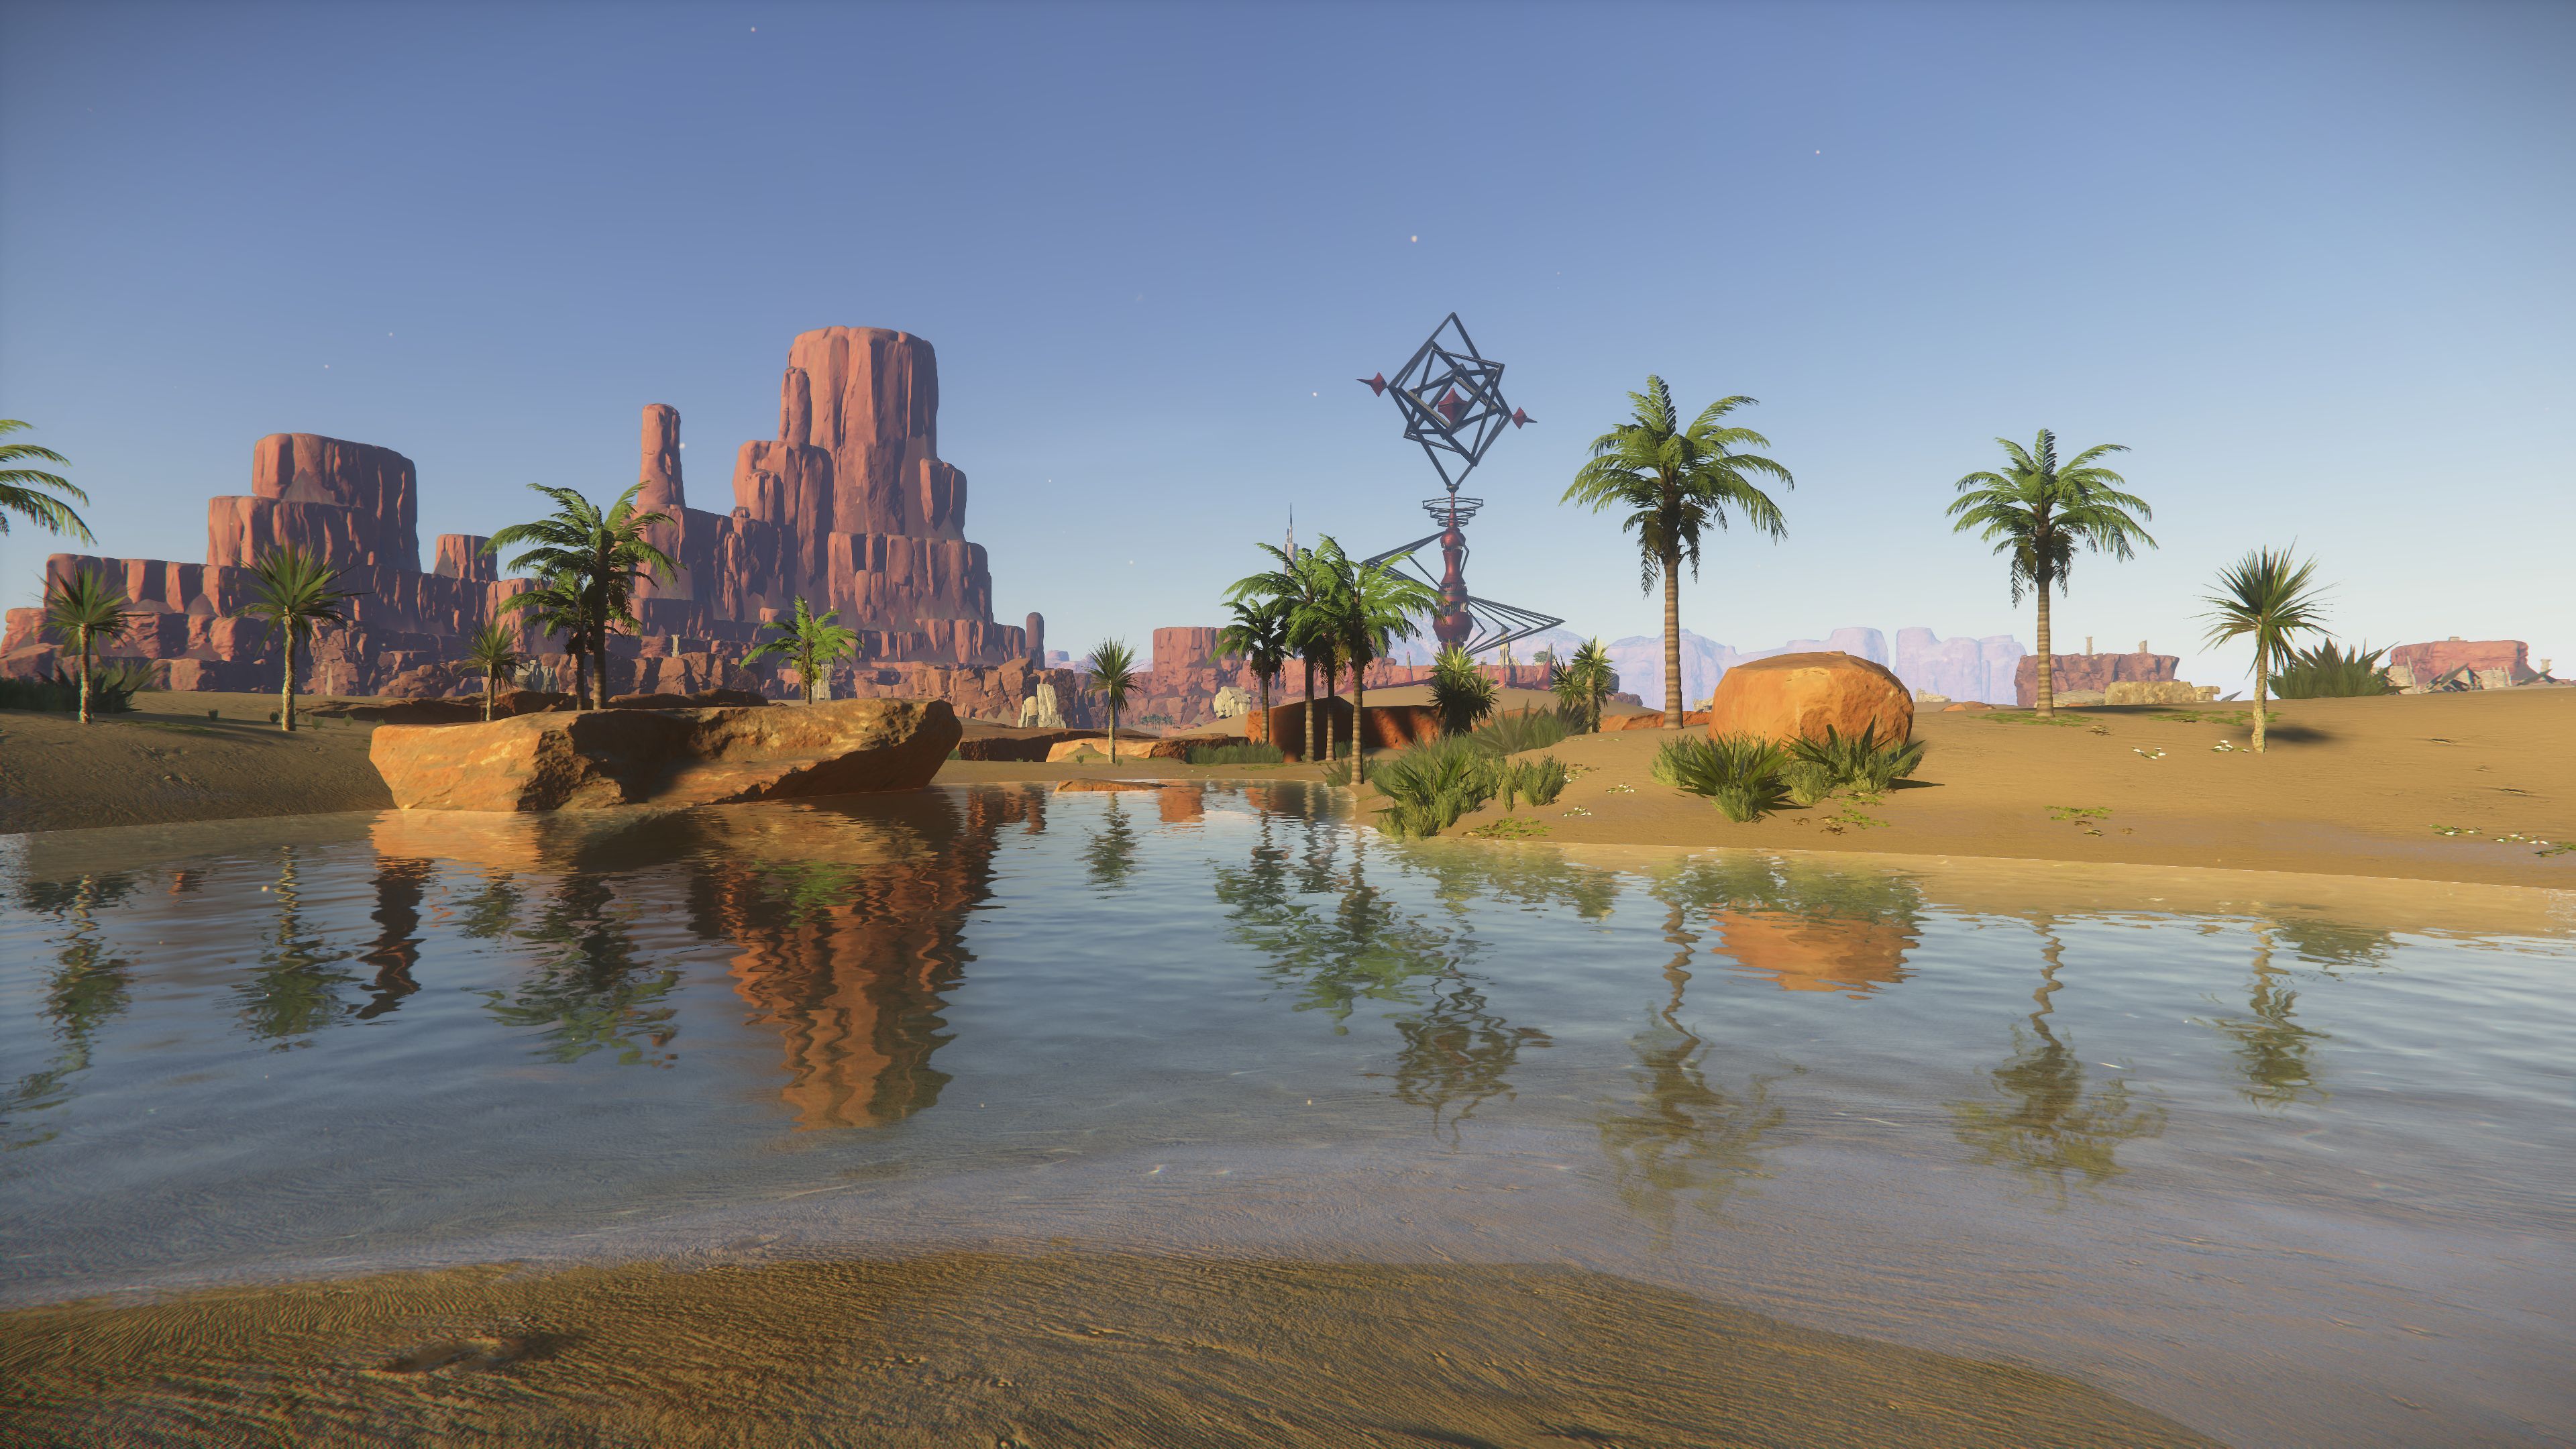 Sonic Frontiers preview - desert biome with an oasis and palm trees in the foreground